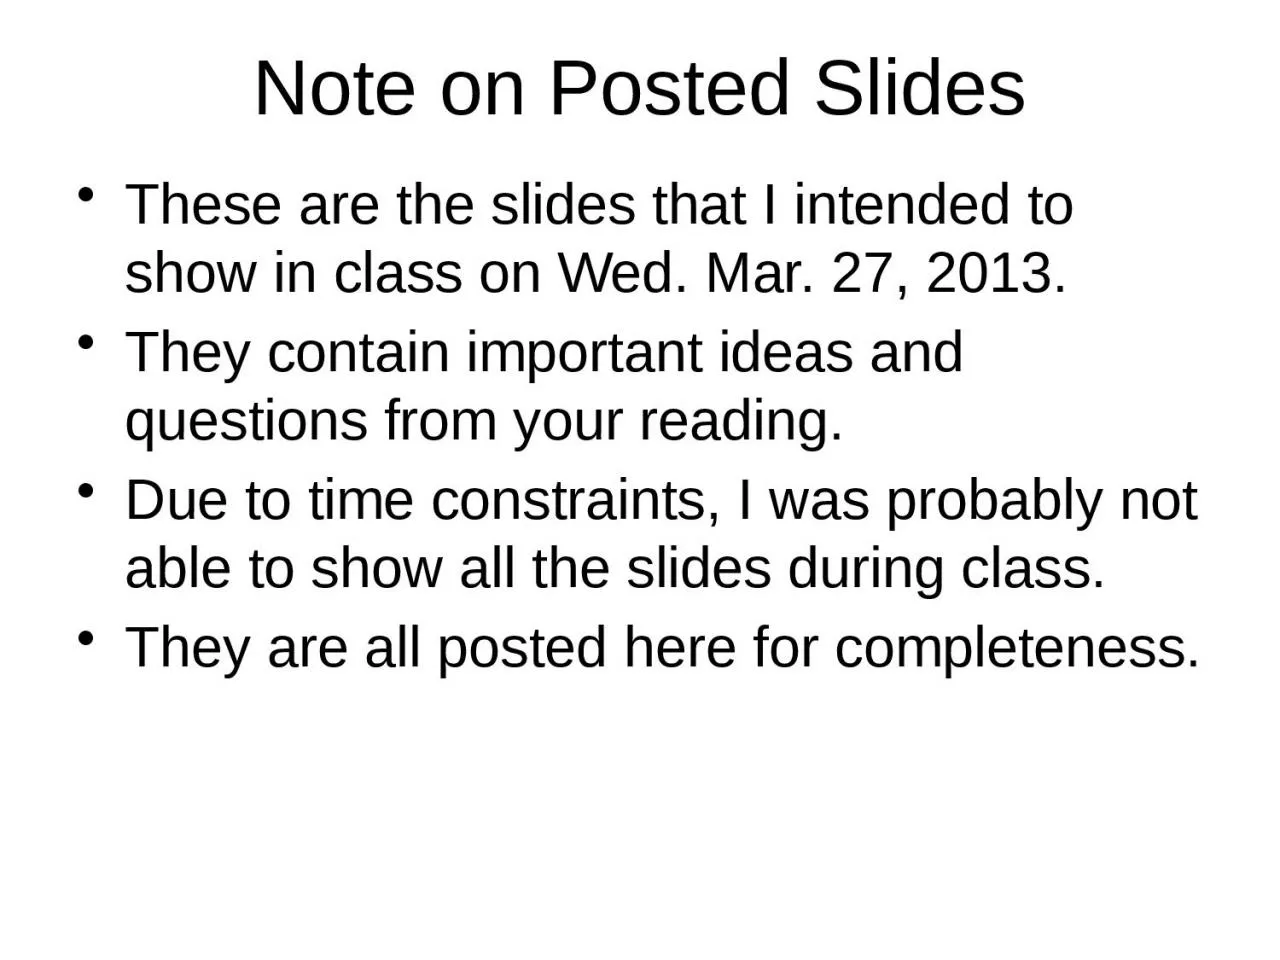 Note on Posted Slides These are the slides that I intended to show in class on